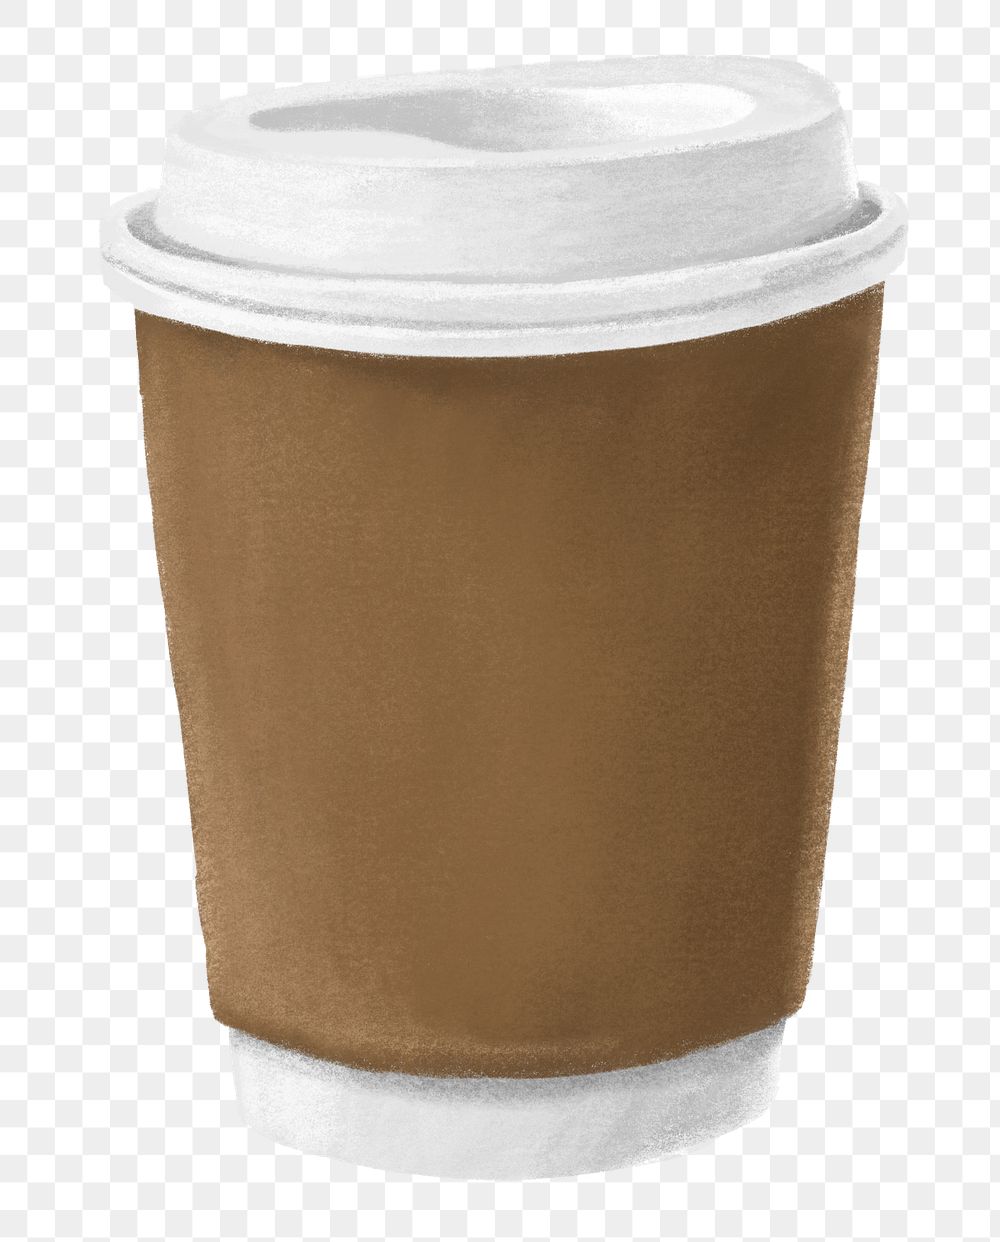 Coffee cup png, aesthetic illustration, transparent background